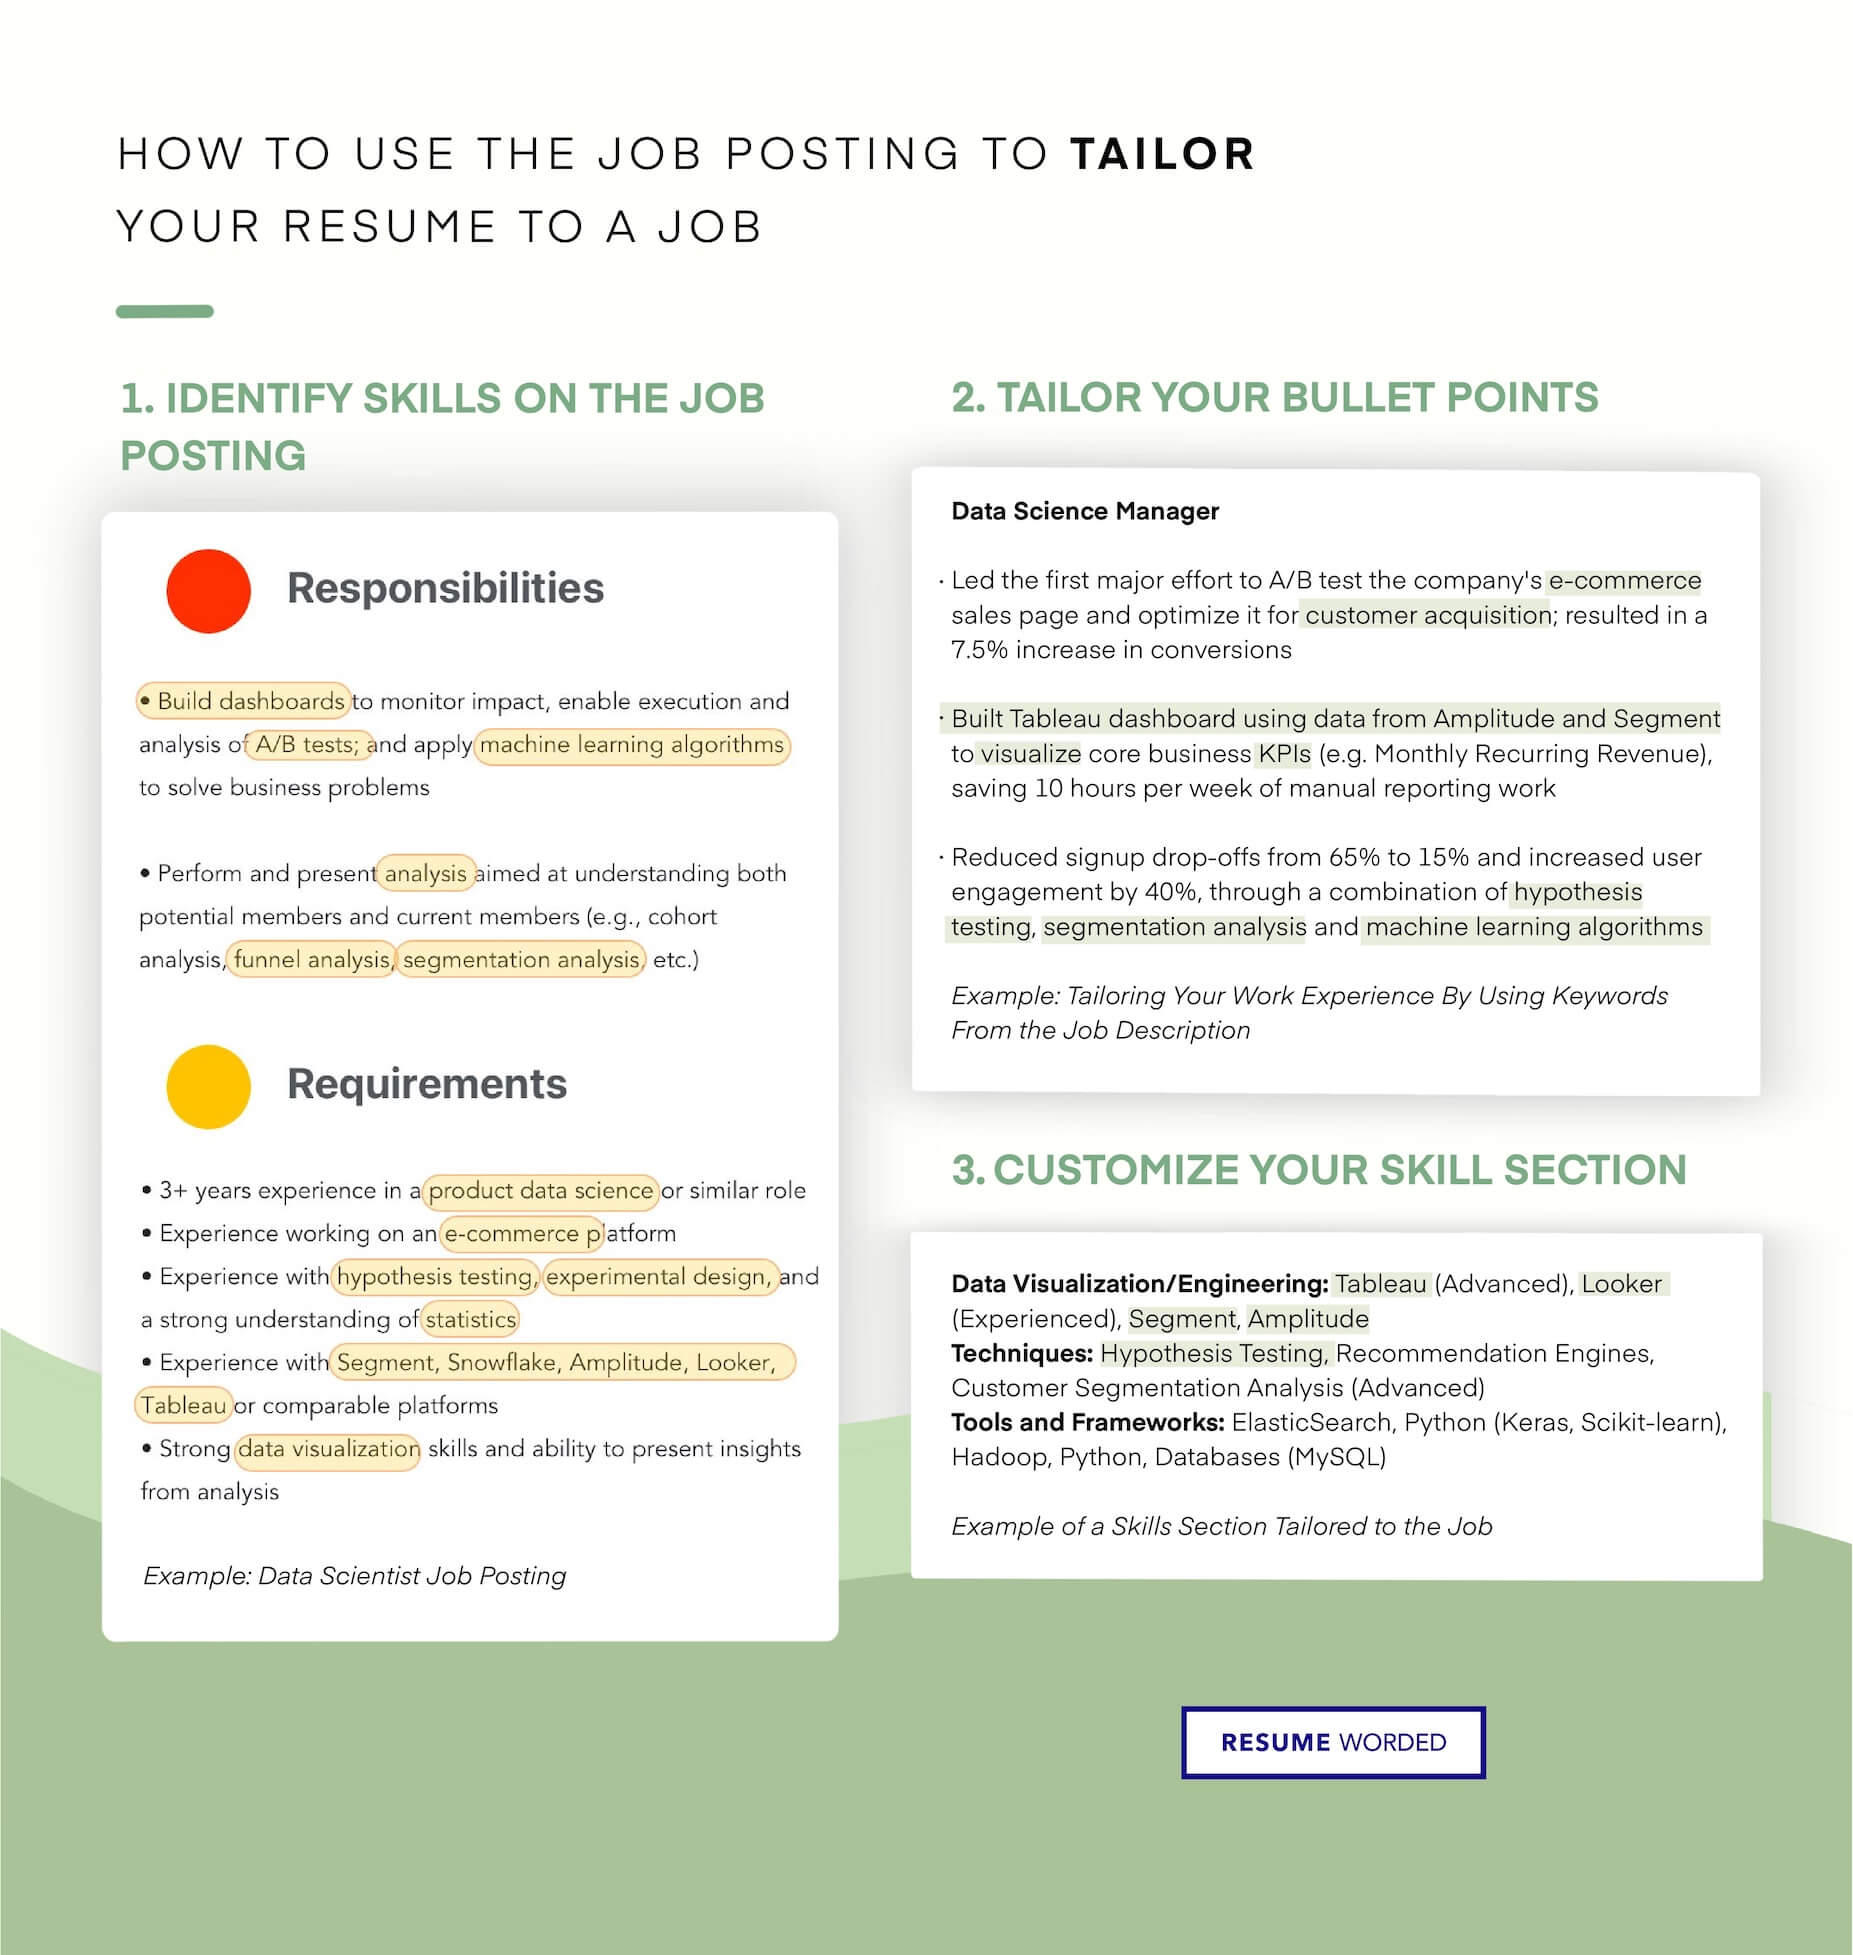 Customize your resume to your potential employer's industry. - Purchasing Coordinator  Resume